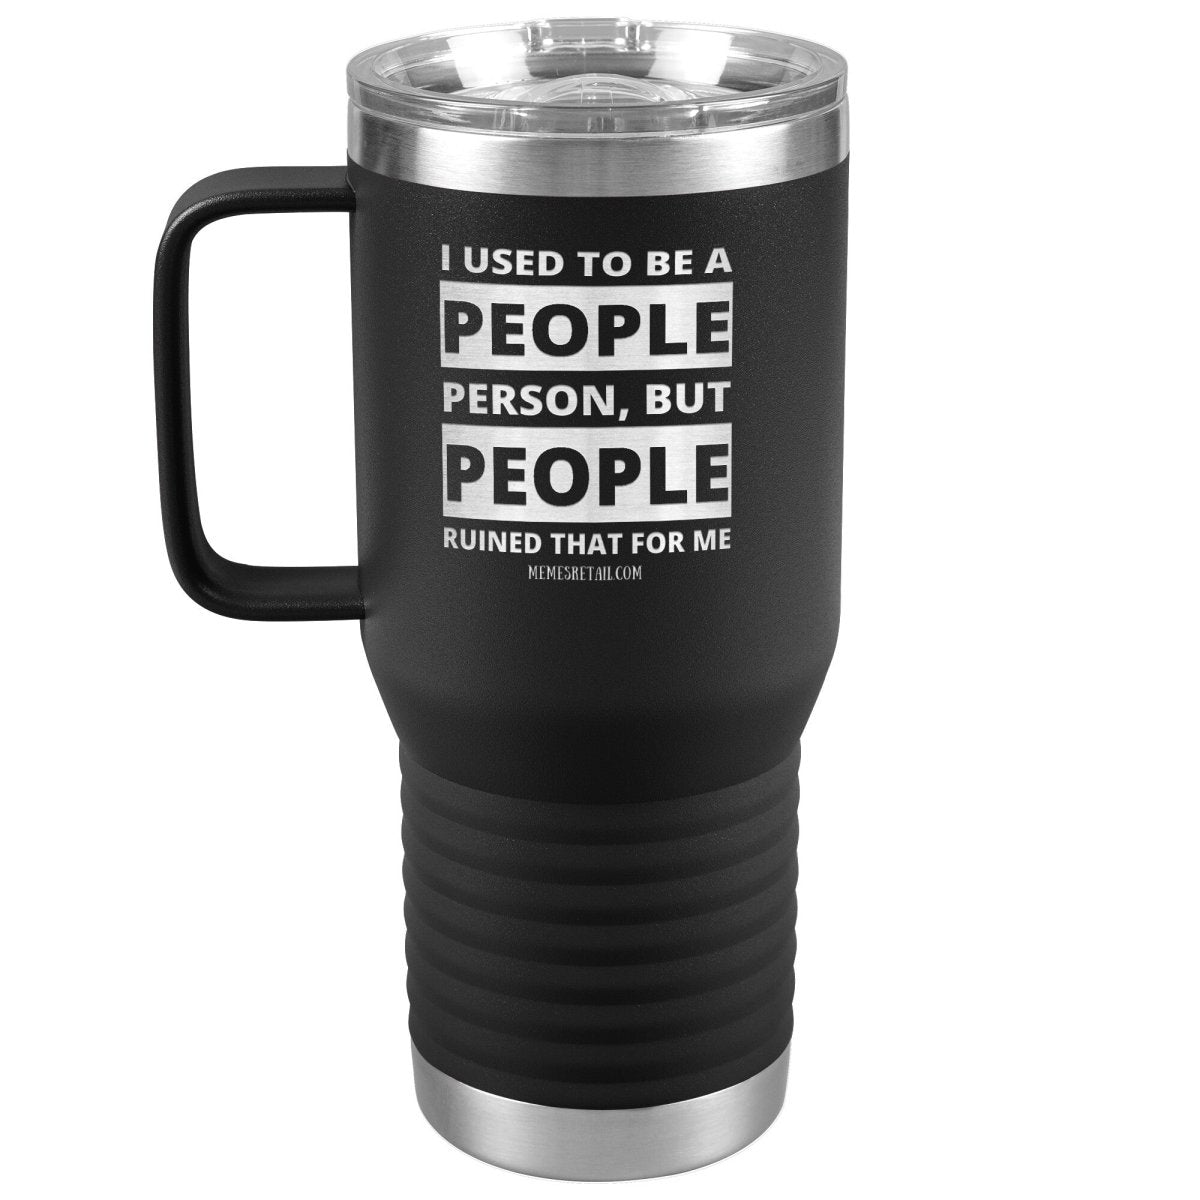 I Used To Be A People Person, But People Ruined That For Me Tumblers, 20oz Travel Tumbler / Black - MemesRetail.com